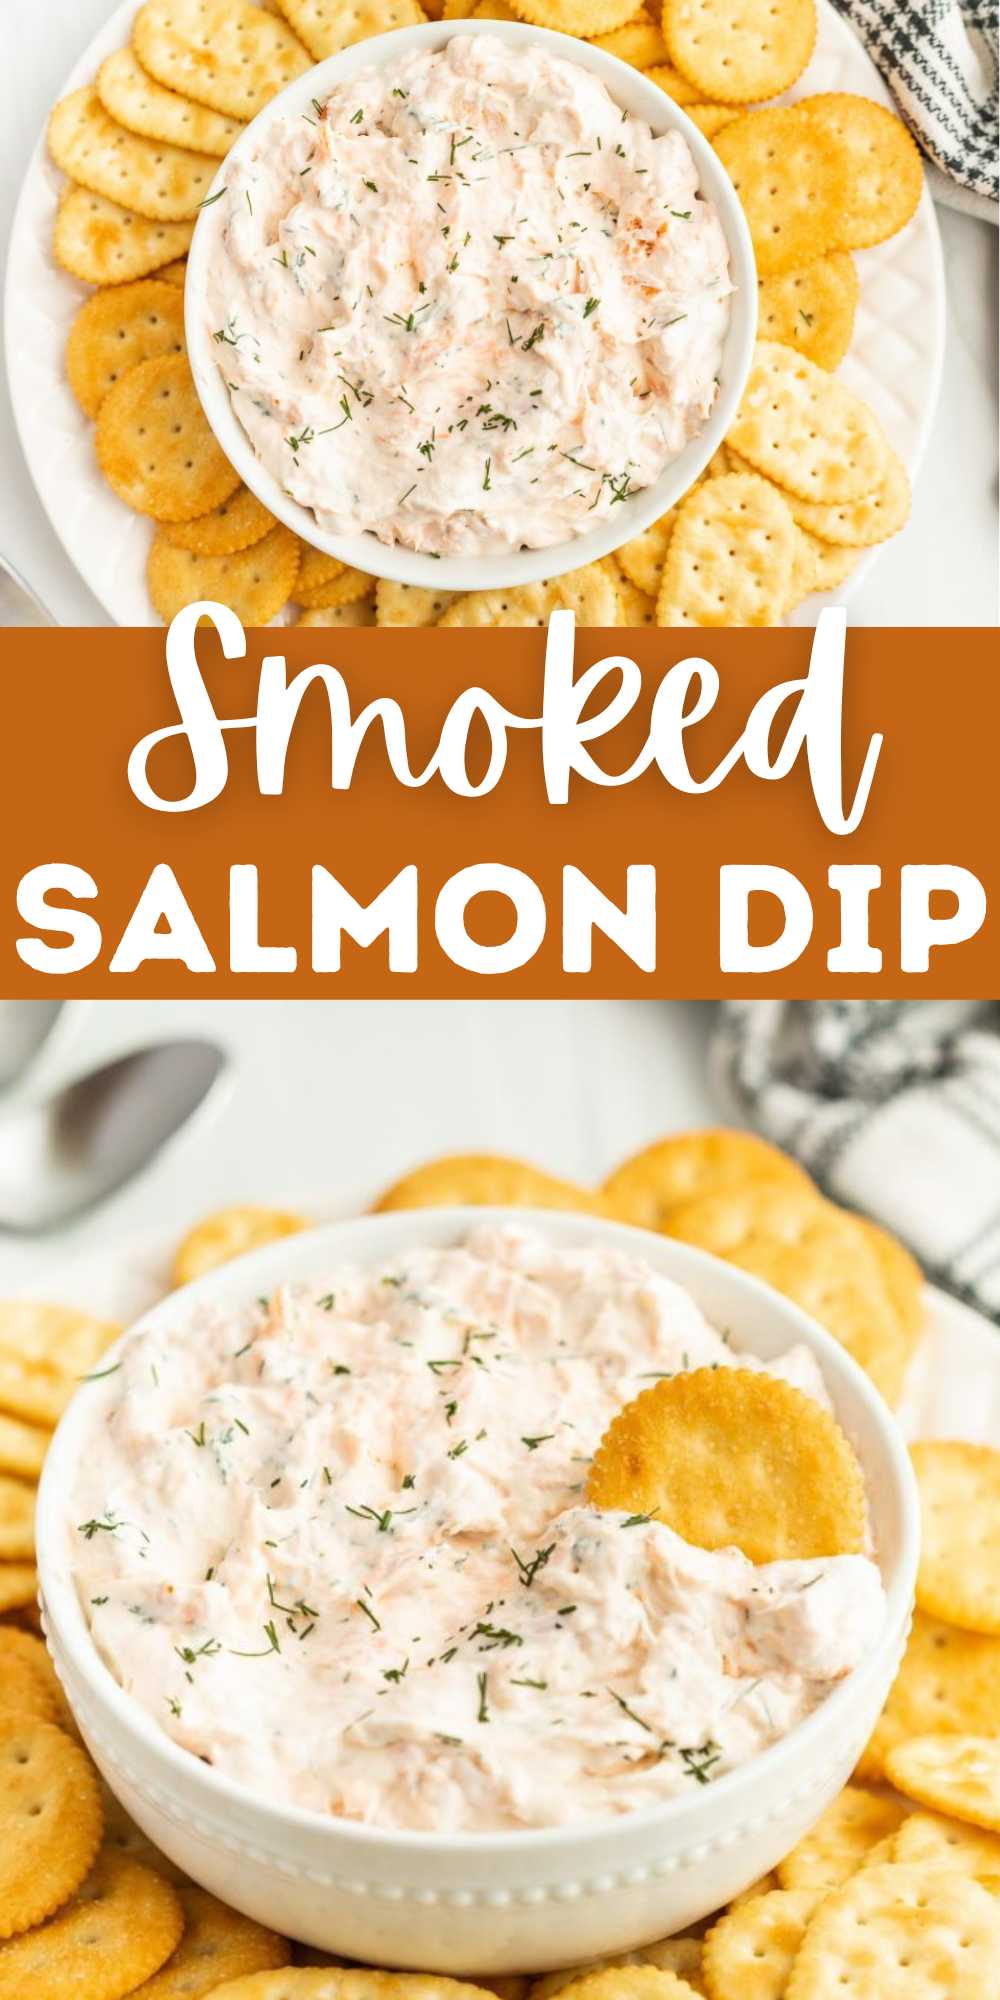 All you need is a few simple ingredients to make this Smoked Salmon Dip. It is creamy, delicious, loaded with flavor and easy to make. This dip is so addicting and is made with simple ingredients. You will love how quick and easy it is to prepare. We love to serve with crackers, bagel chips and more. #grillonadime #smokedsalmondip #salmondiprecipe